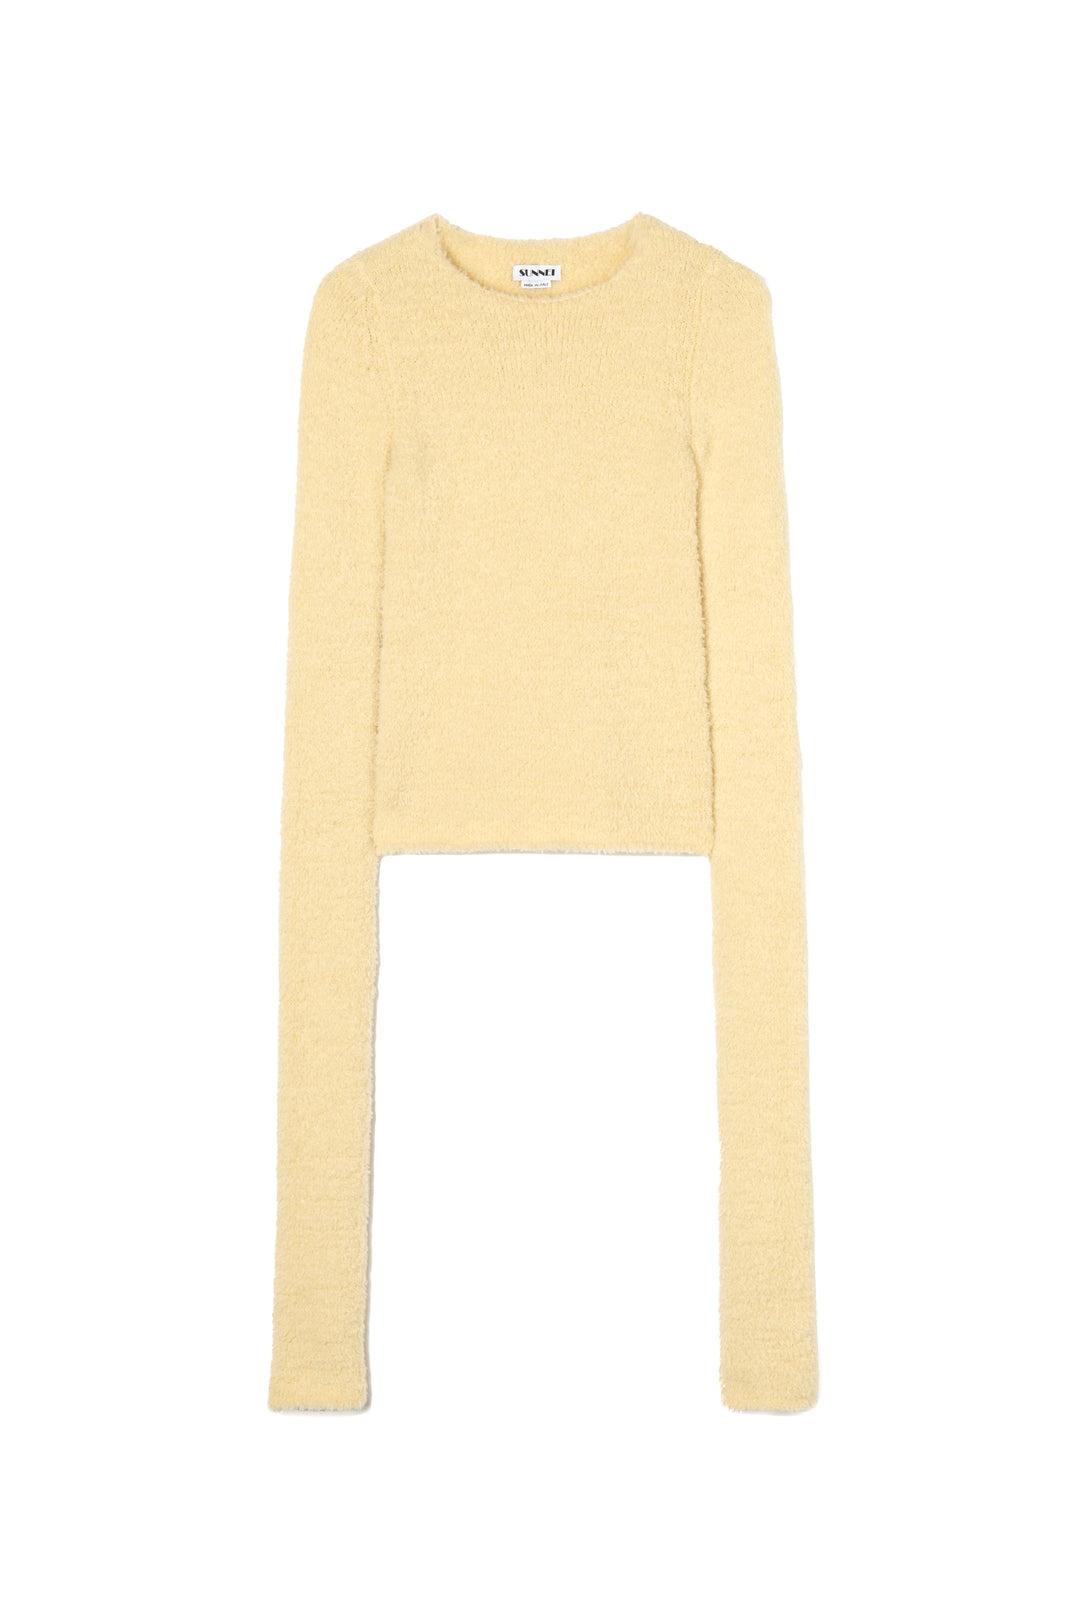 EXTRA-LONG SLEEVES FLUFFY TOP / light yellow - 1